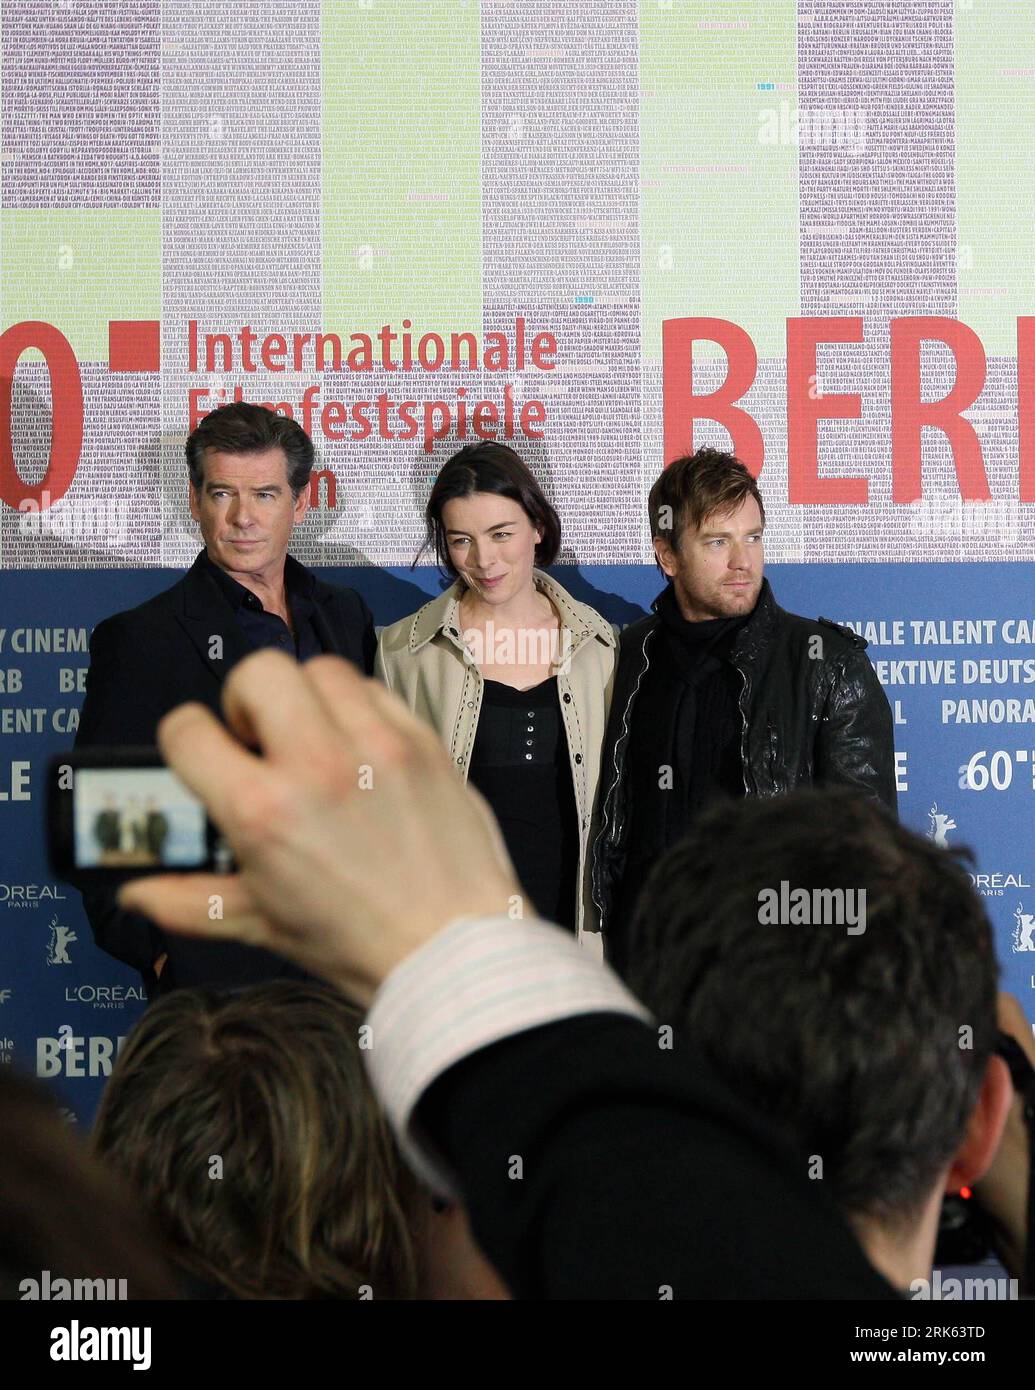 Bildnummer: 53793559  Datum: 12.02.2010  Copyright: imago/Xinhua (100212) -- BERLIN, Feb. 12, 2010 (Xinhua) -- Actor Pierce Brosnan(L), actress Olivia Williams (C)and actor Ewan McGregor attend a press conference for the movie The Ghost Writer, during the 60th Berlinale Film Festival in Berlin, Feb. 11, 2010. (Xinhua/Luo Huanhuan)(axy) (4)GERMANY-BERLIN-GHOST WRITER-PRESS PUBLICATIONxNOTxINxCHN People Film 60. Internationale Filmfestspiele Berlinale Berlin Pressekonferenz premiumd kbdig xcb 2010 hoch o0 Der Ghostwriter Mc Gregor Porträt    Bildnummer 53793559 Date 12 02 2010 Copyright Imago XI Stock Photo